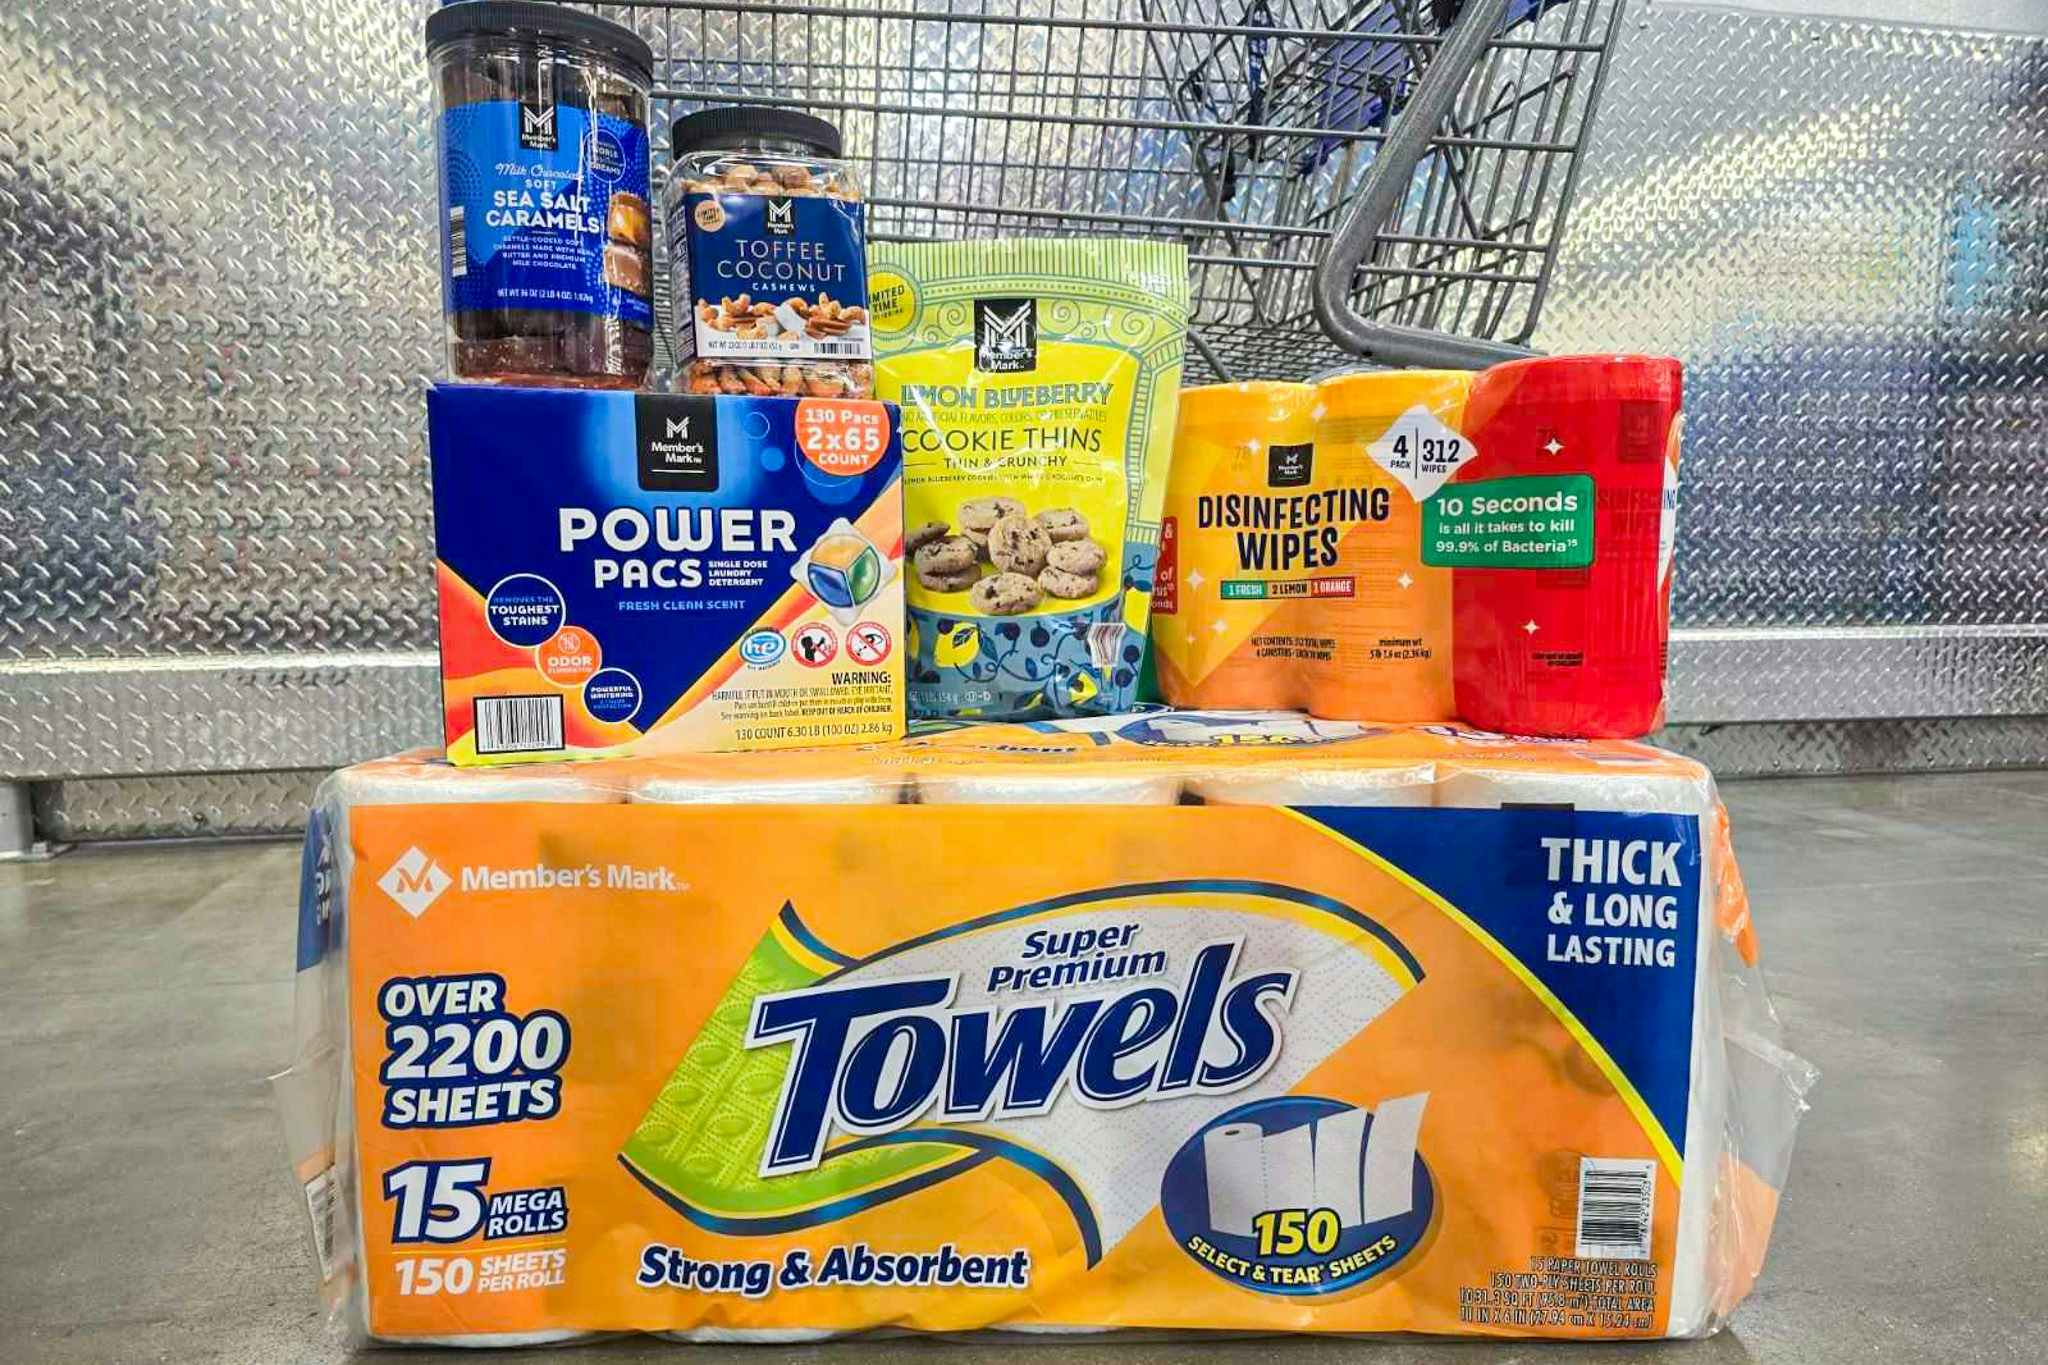 The Best Member's Mark Deals at Sam's Club in April